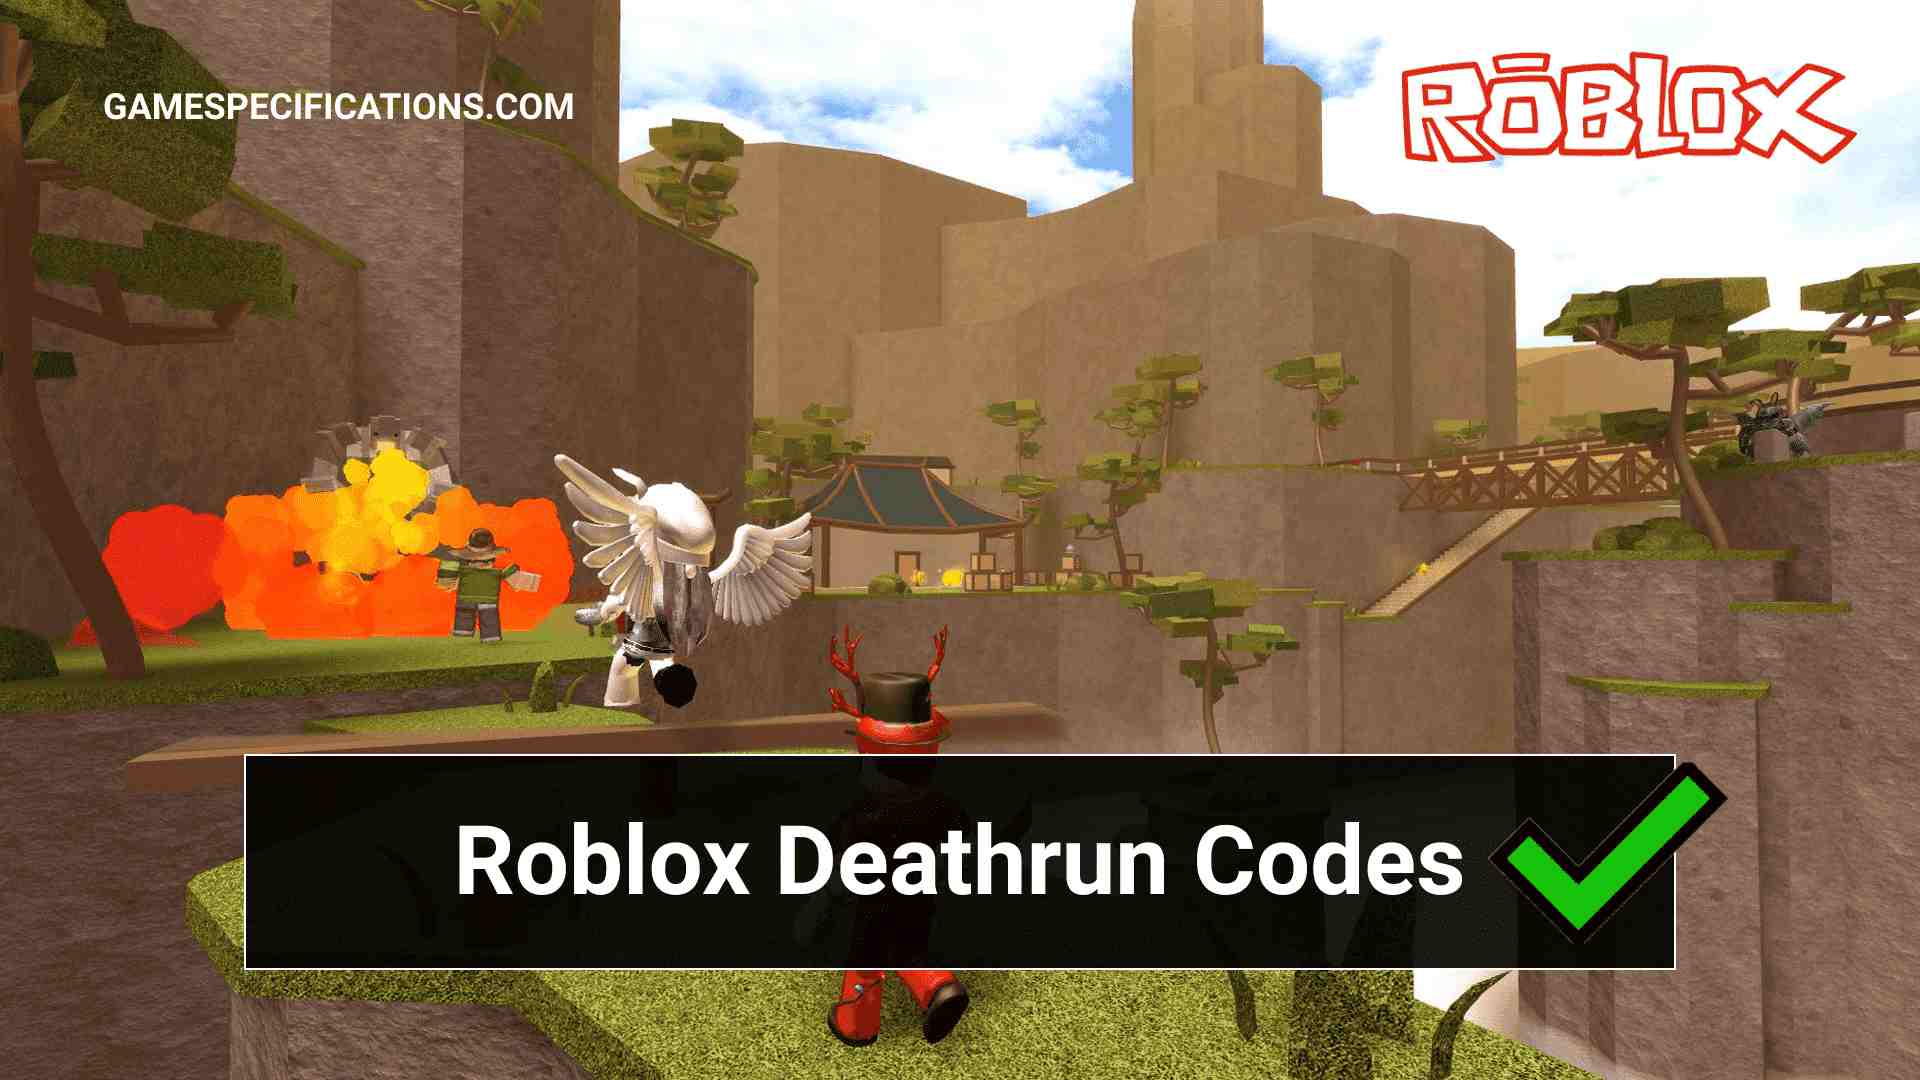 Roblox Deathrun Codes July 2021 Game Specifications - roblox deathrun surface escape